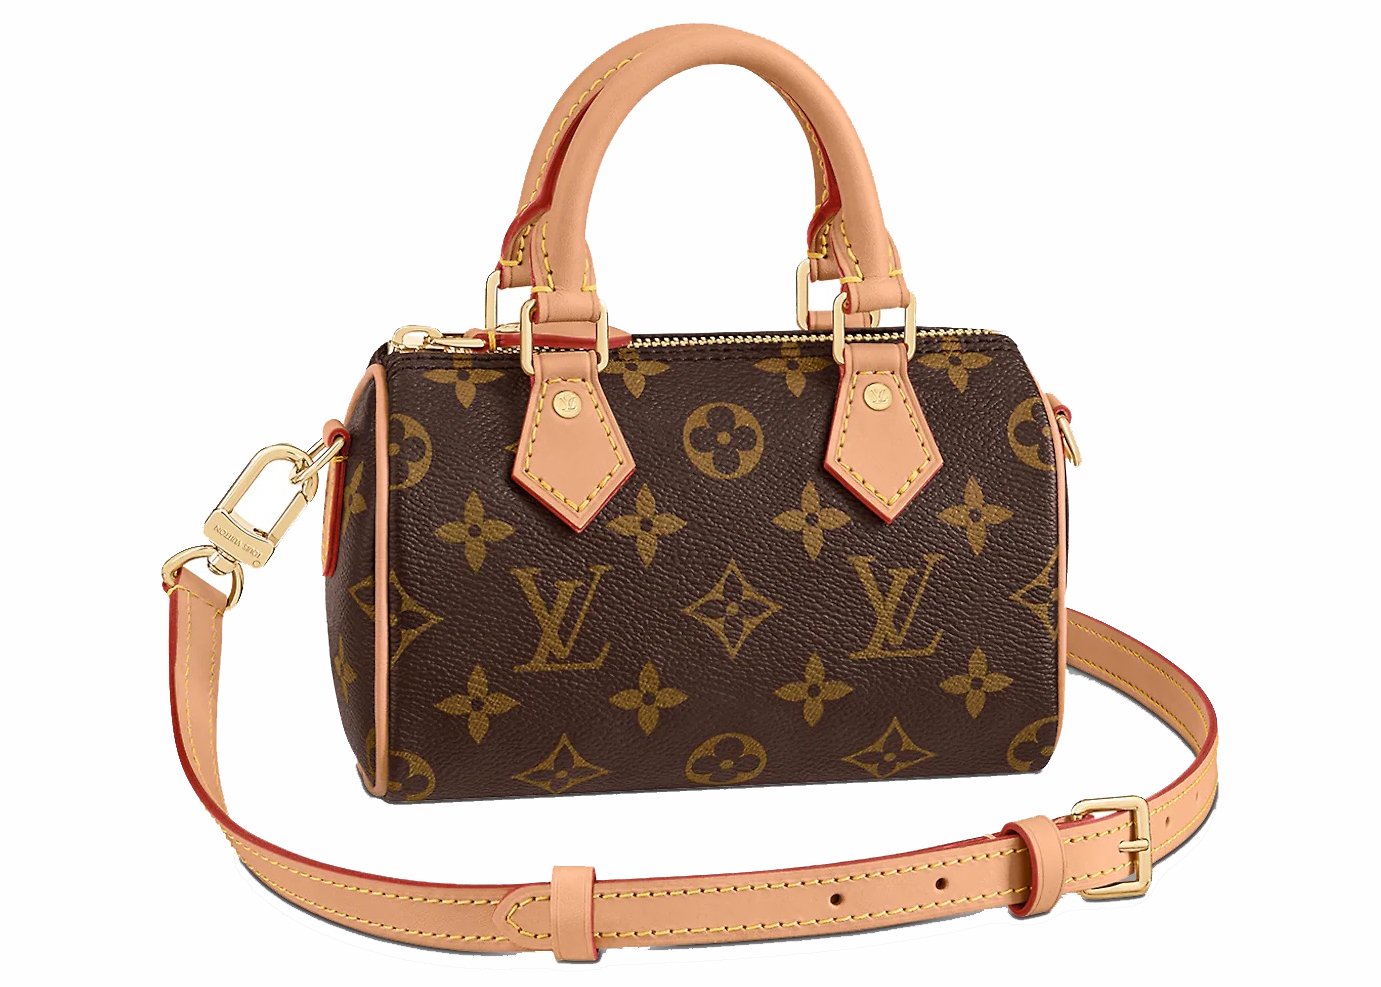 10 Best Louis Vuitton Handbag Purchases To Make  YouTube